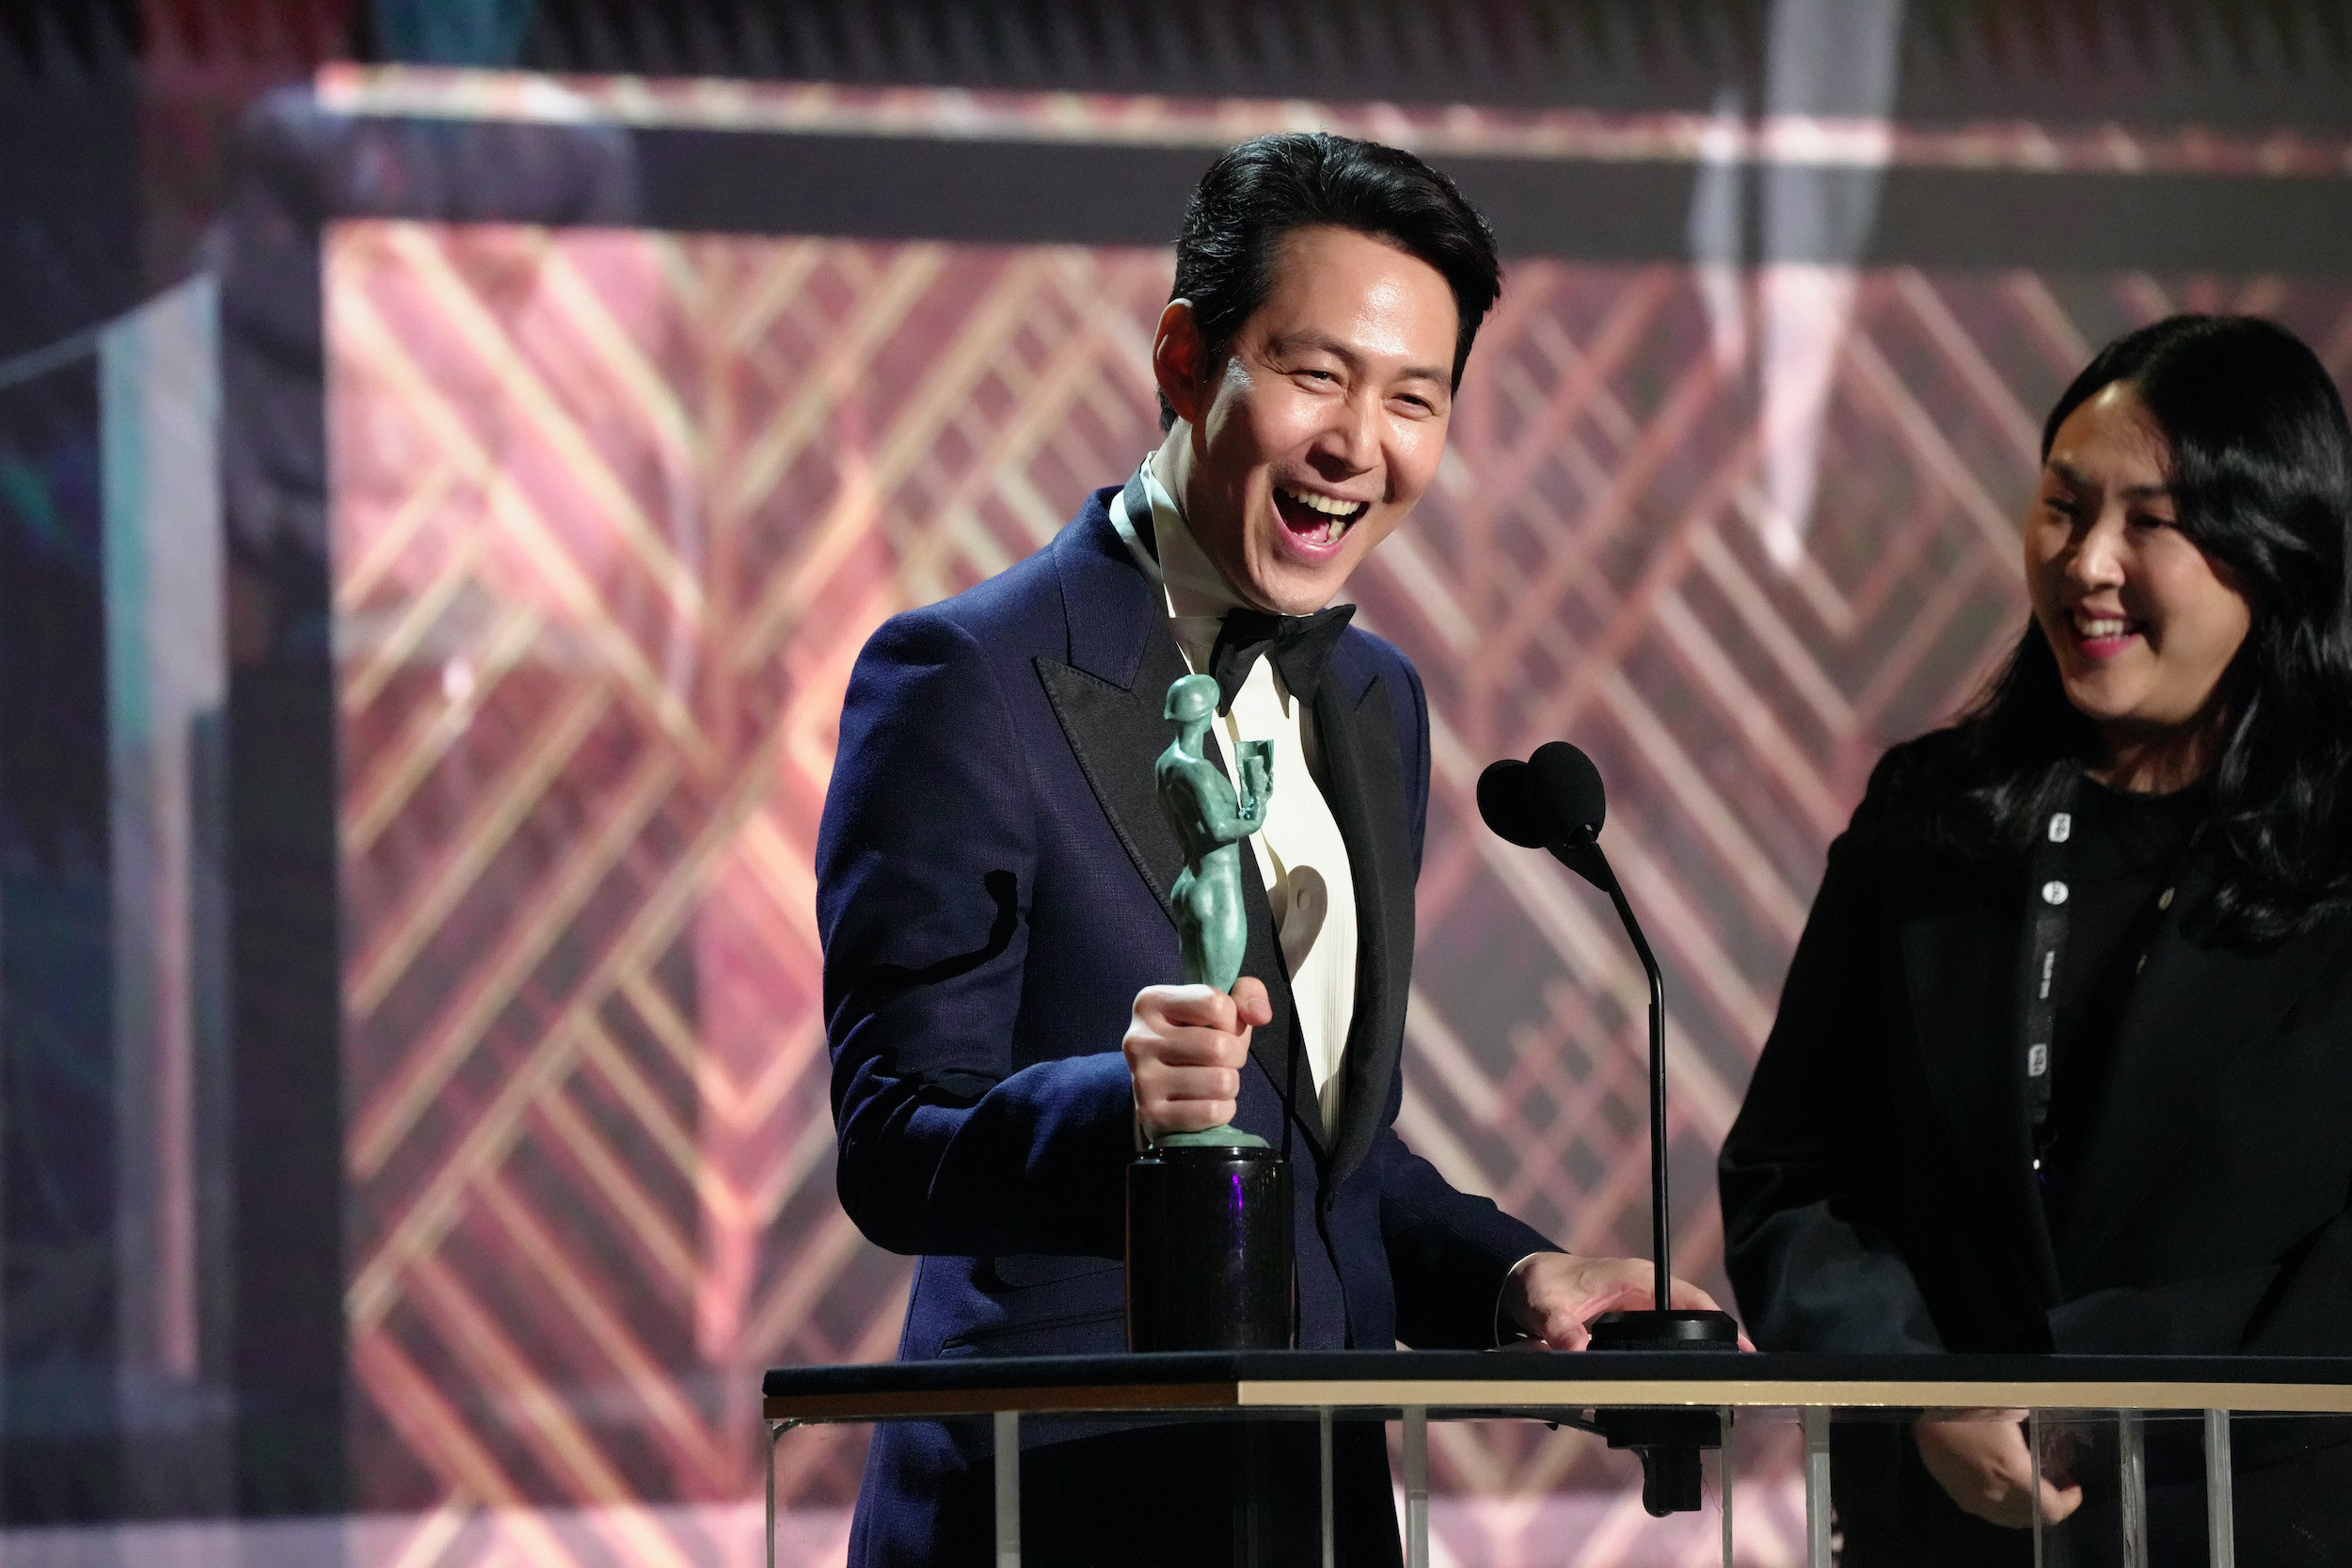 Lee-Jung-jae gives his speech while holding his award